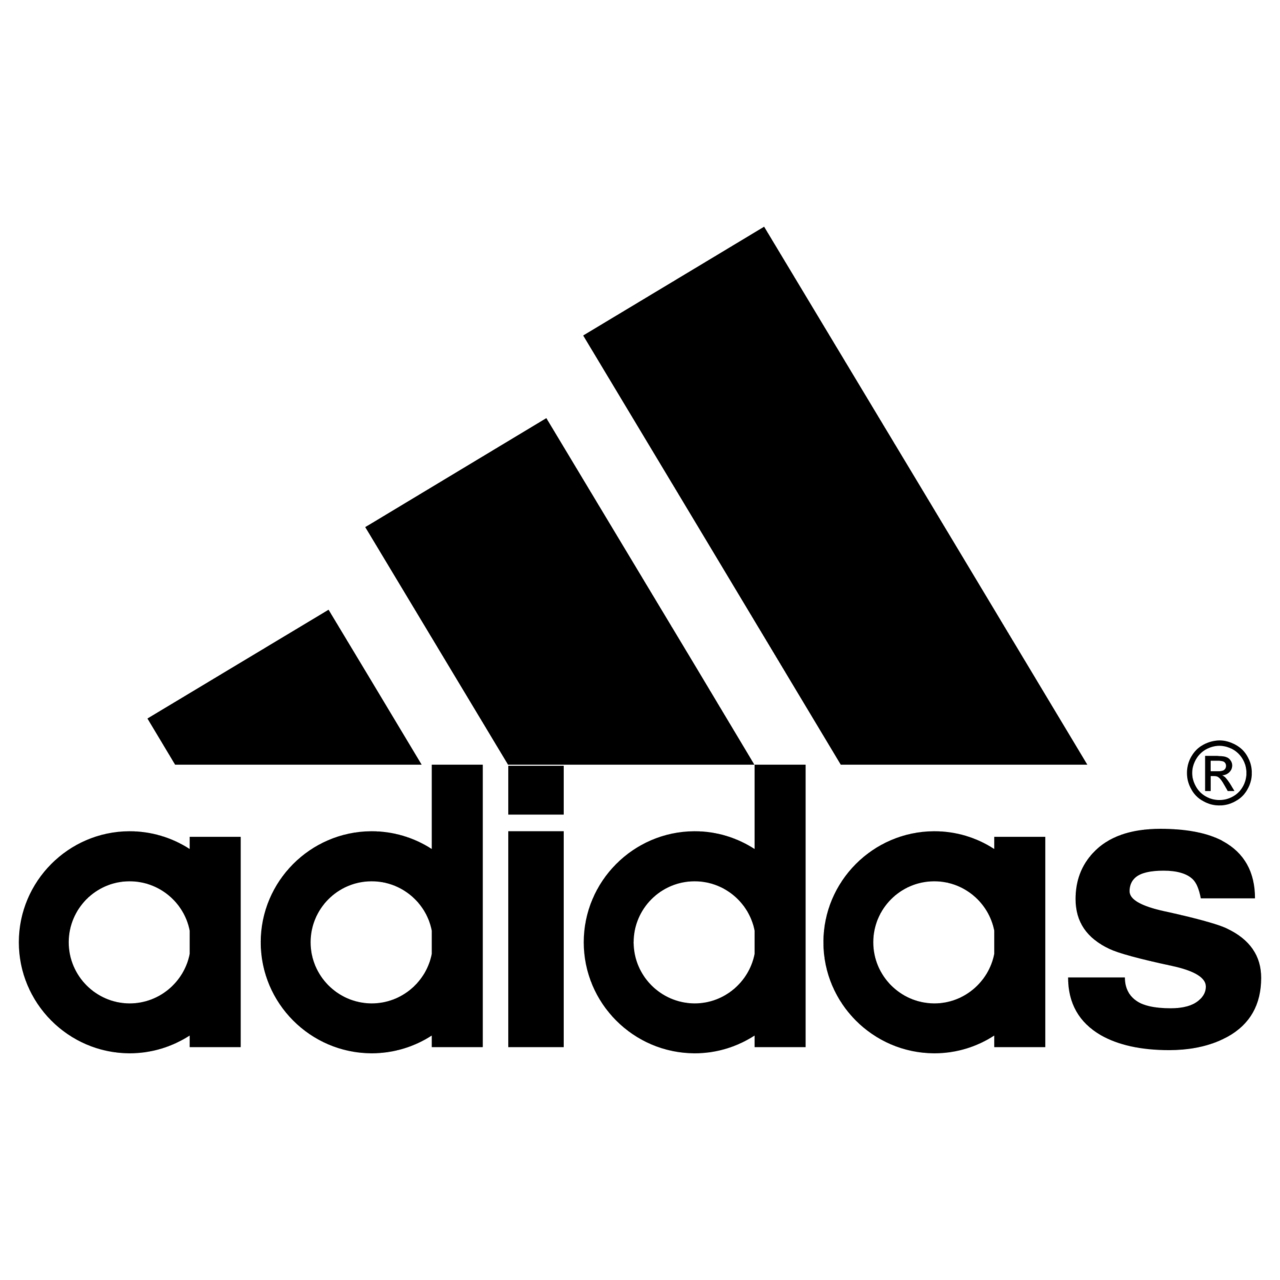 adidas-logo-black-and-white-1.png